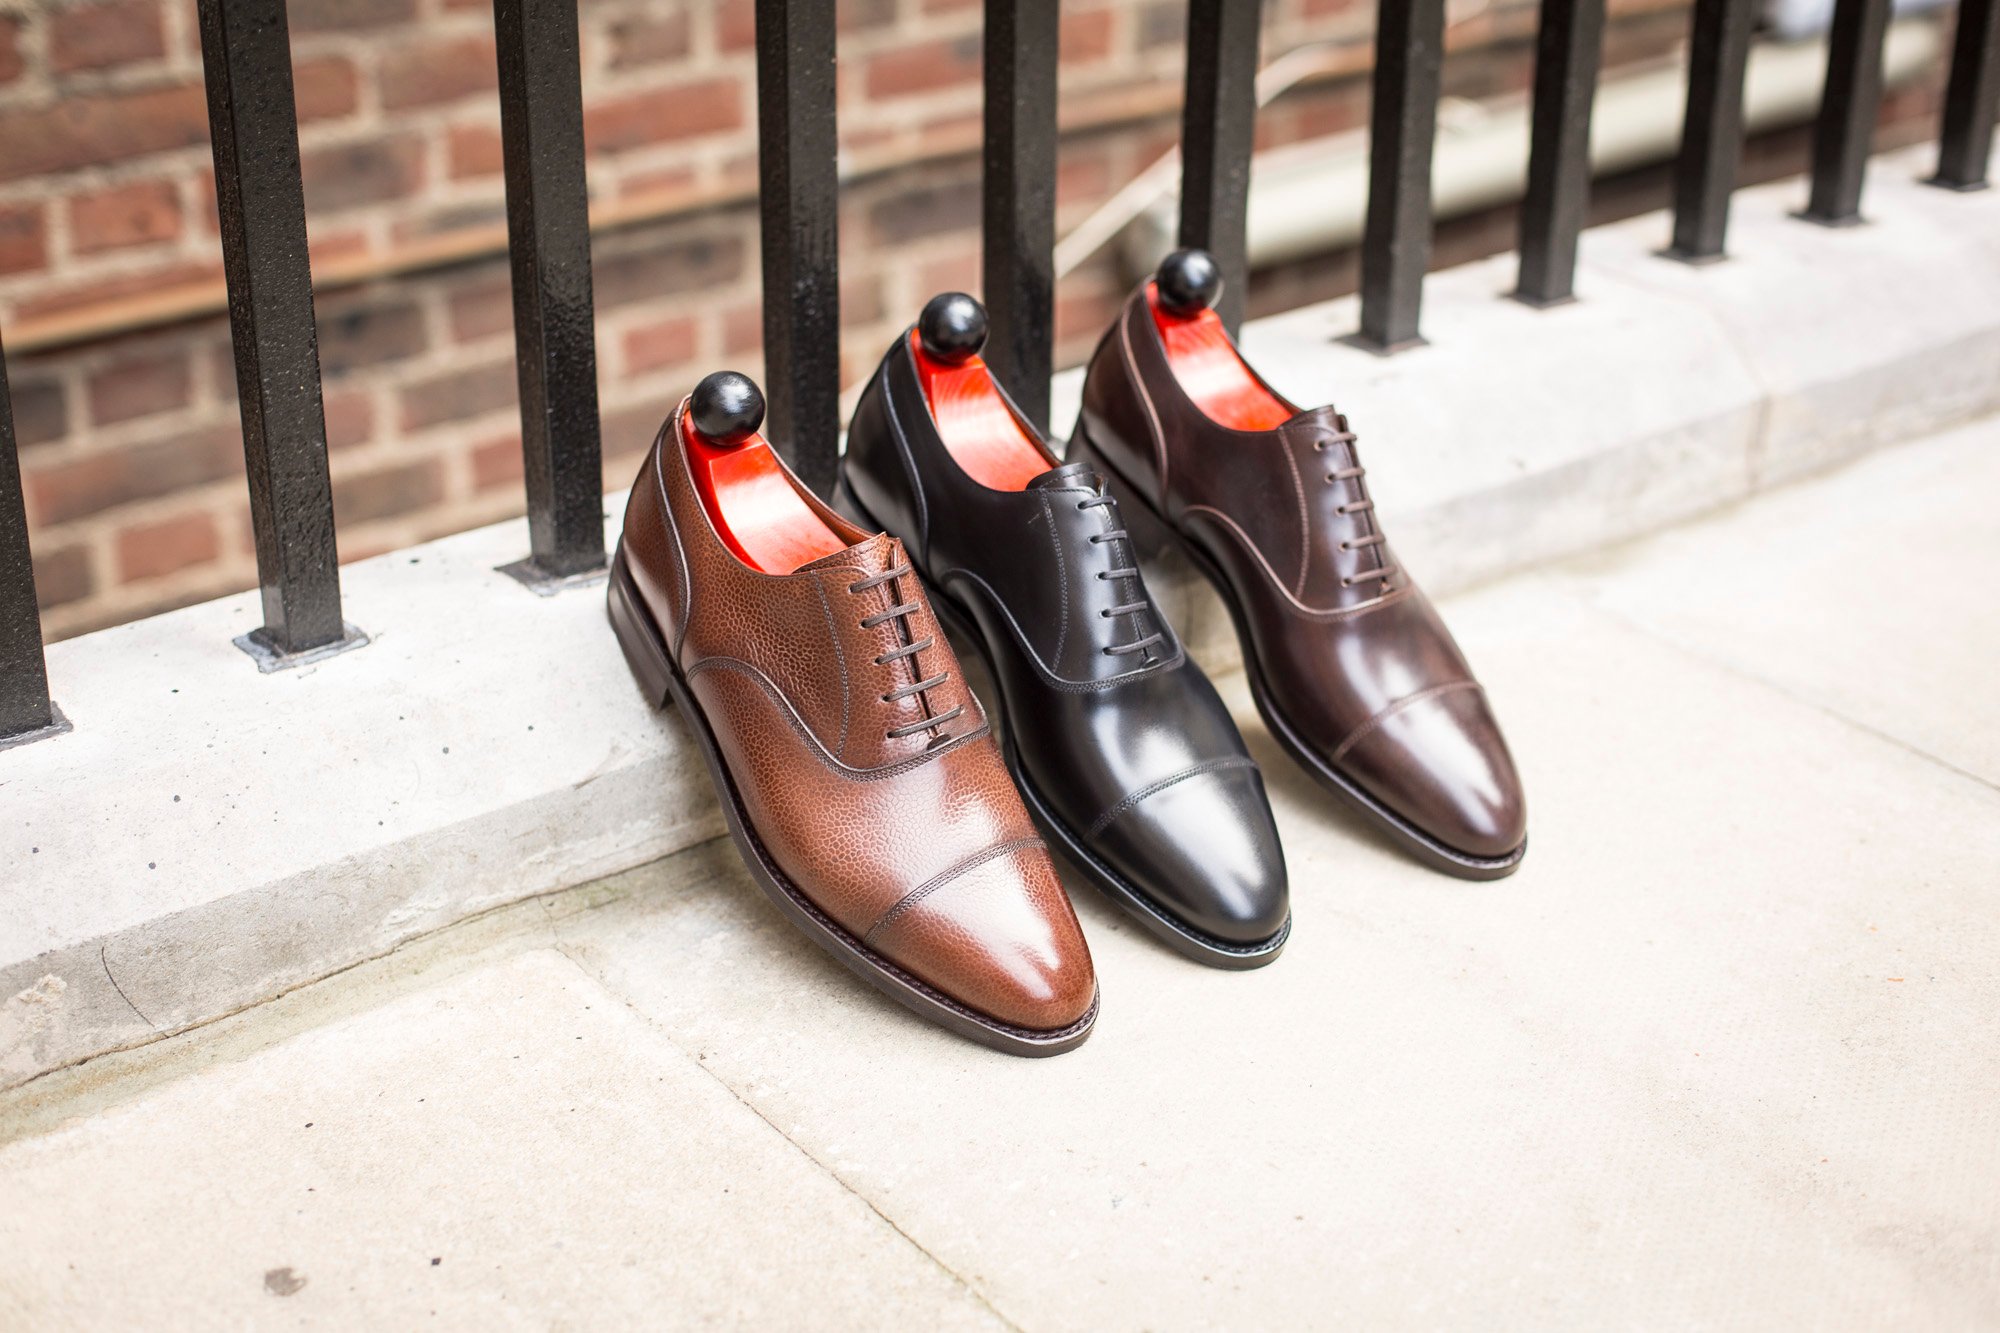 Your classic cap toe by J.FitzPatrick Footwear